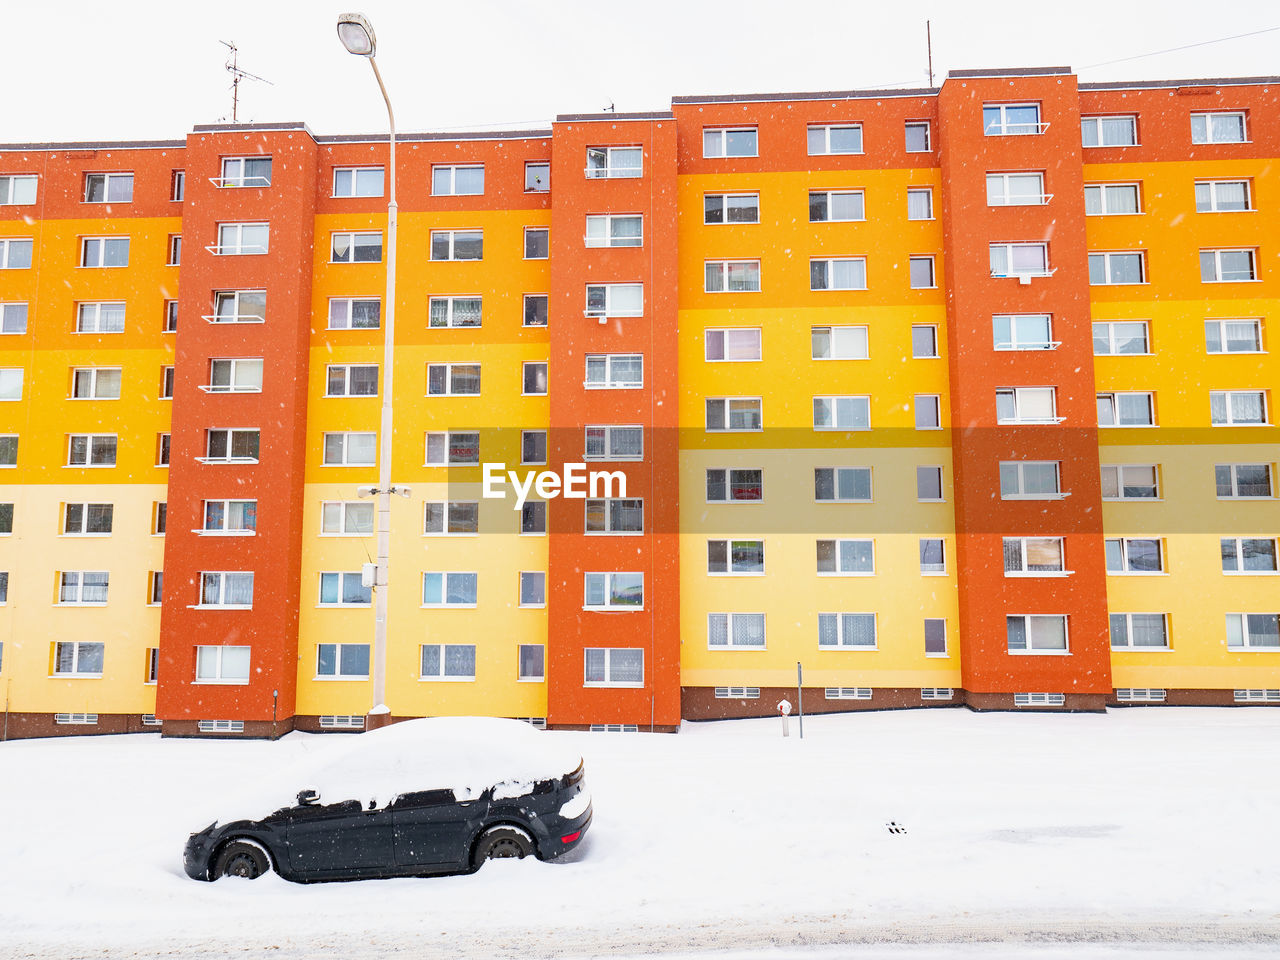 VIEW OF SNOW COVERED APARTMENT BUILDING